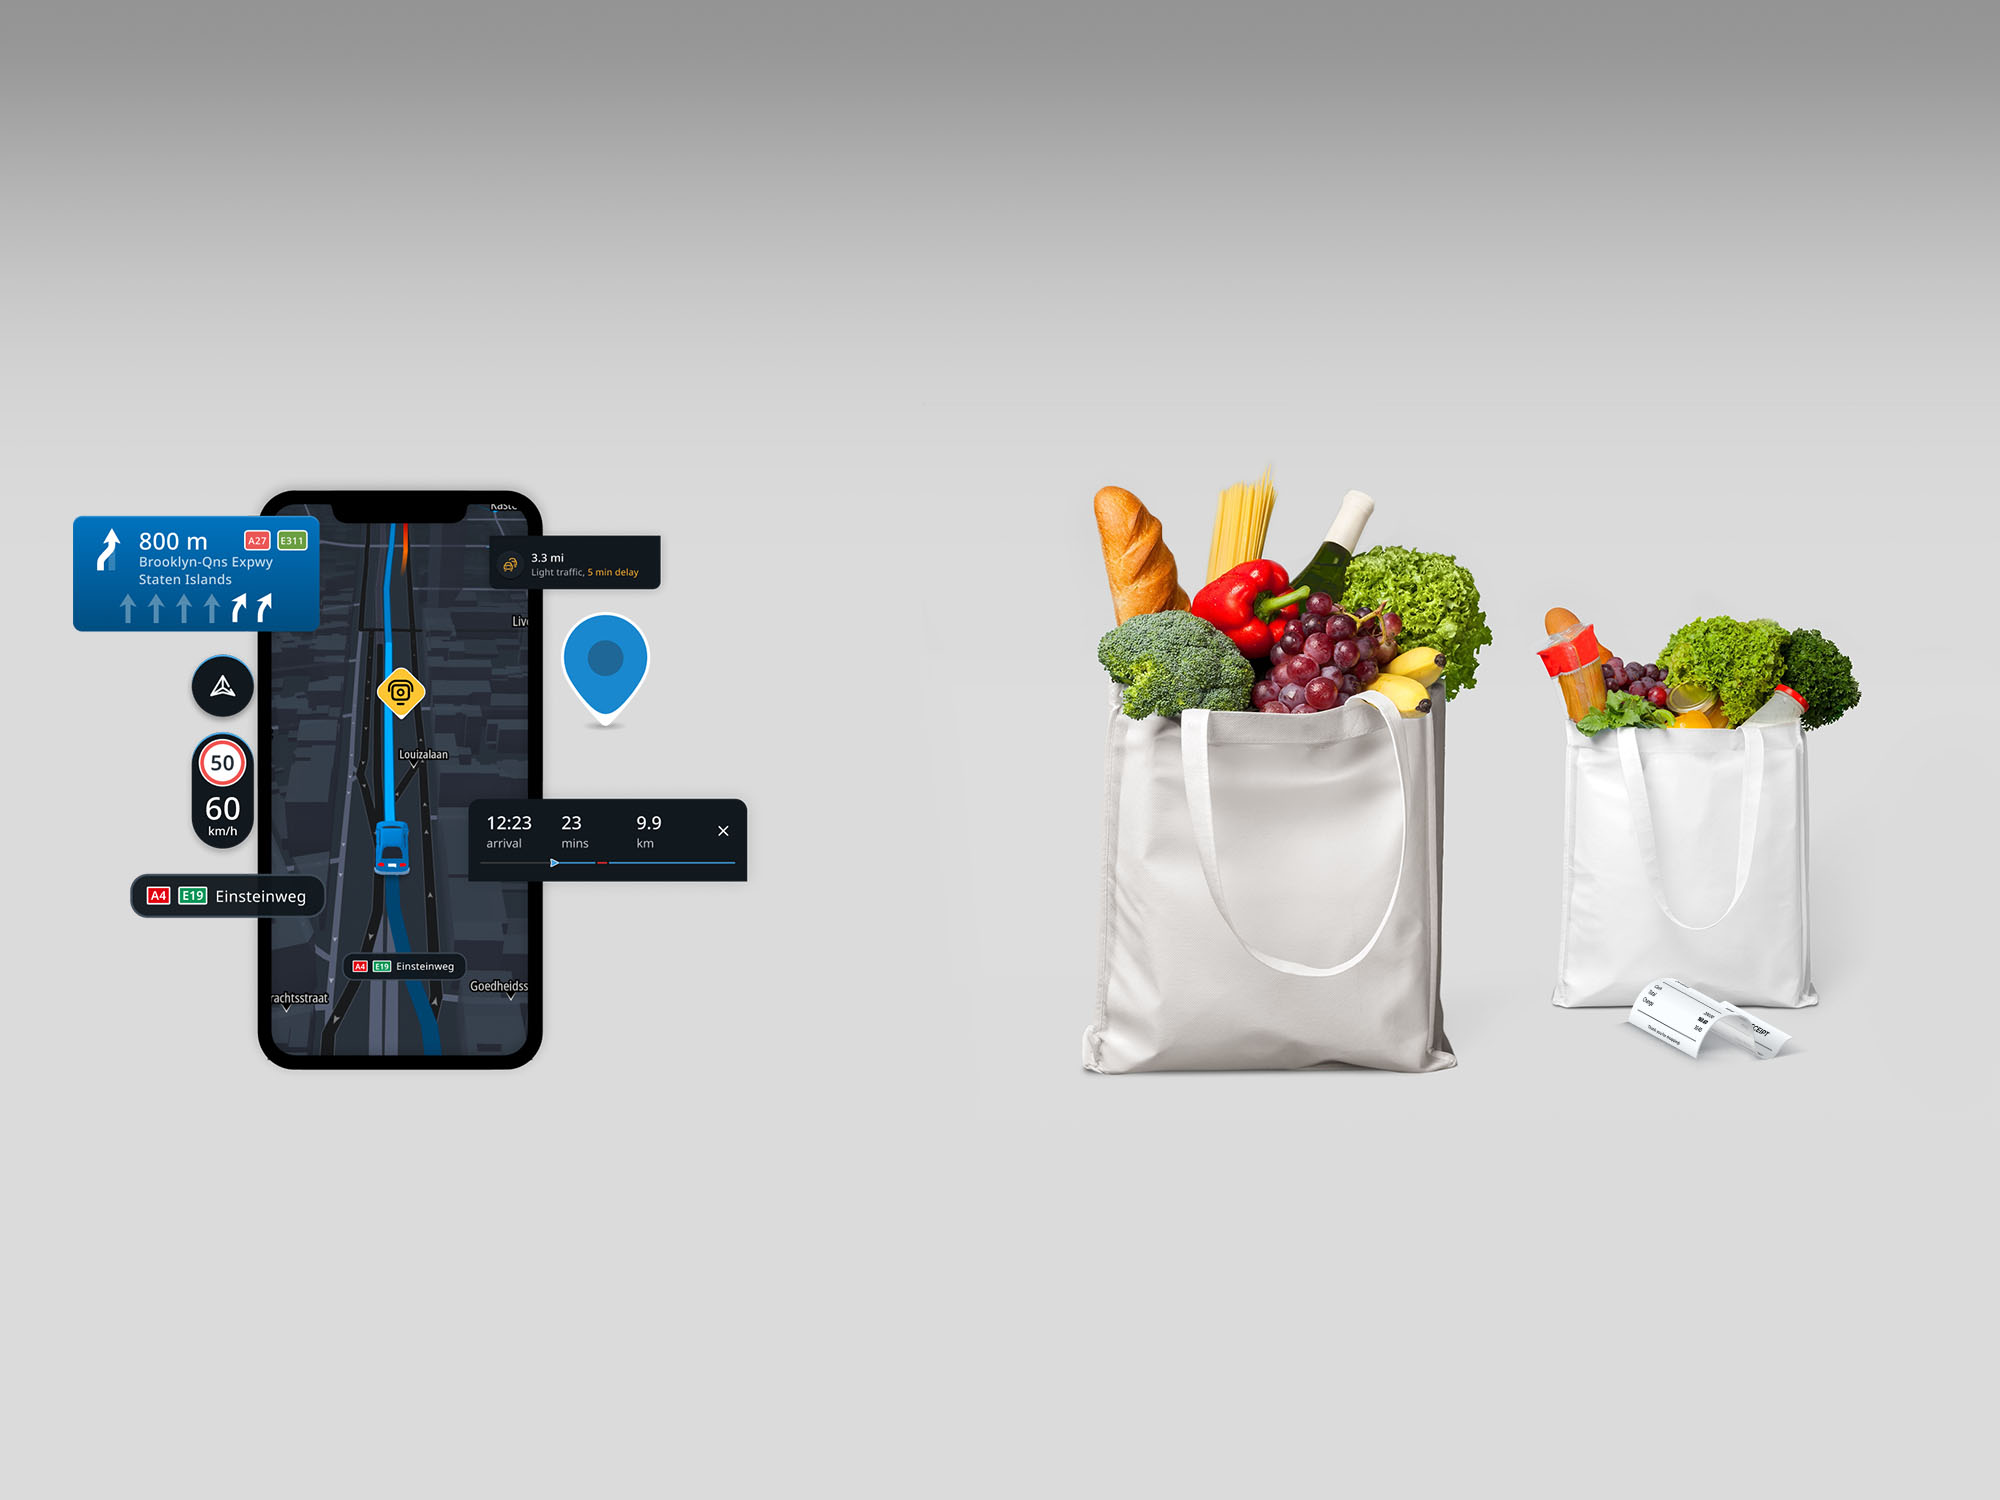 Mobile phone showing the TomTom Navigation SDK UI beside bags of groceries for food delivery